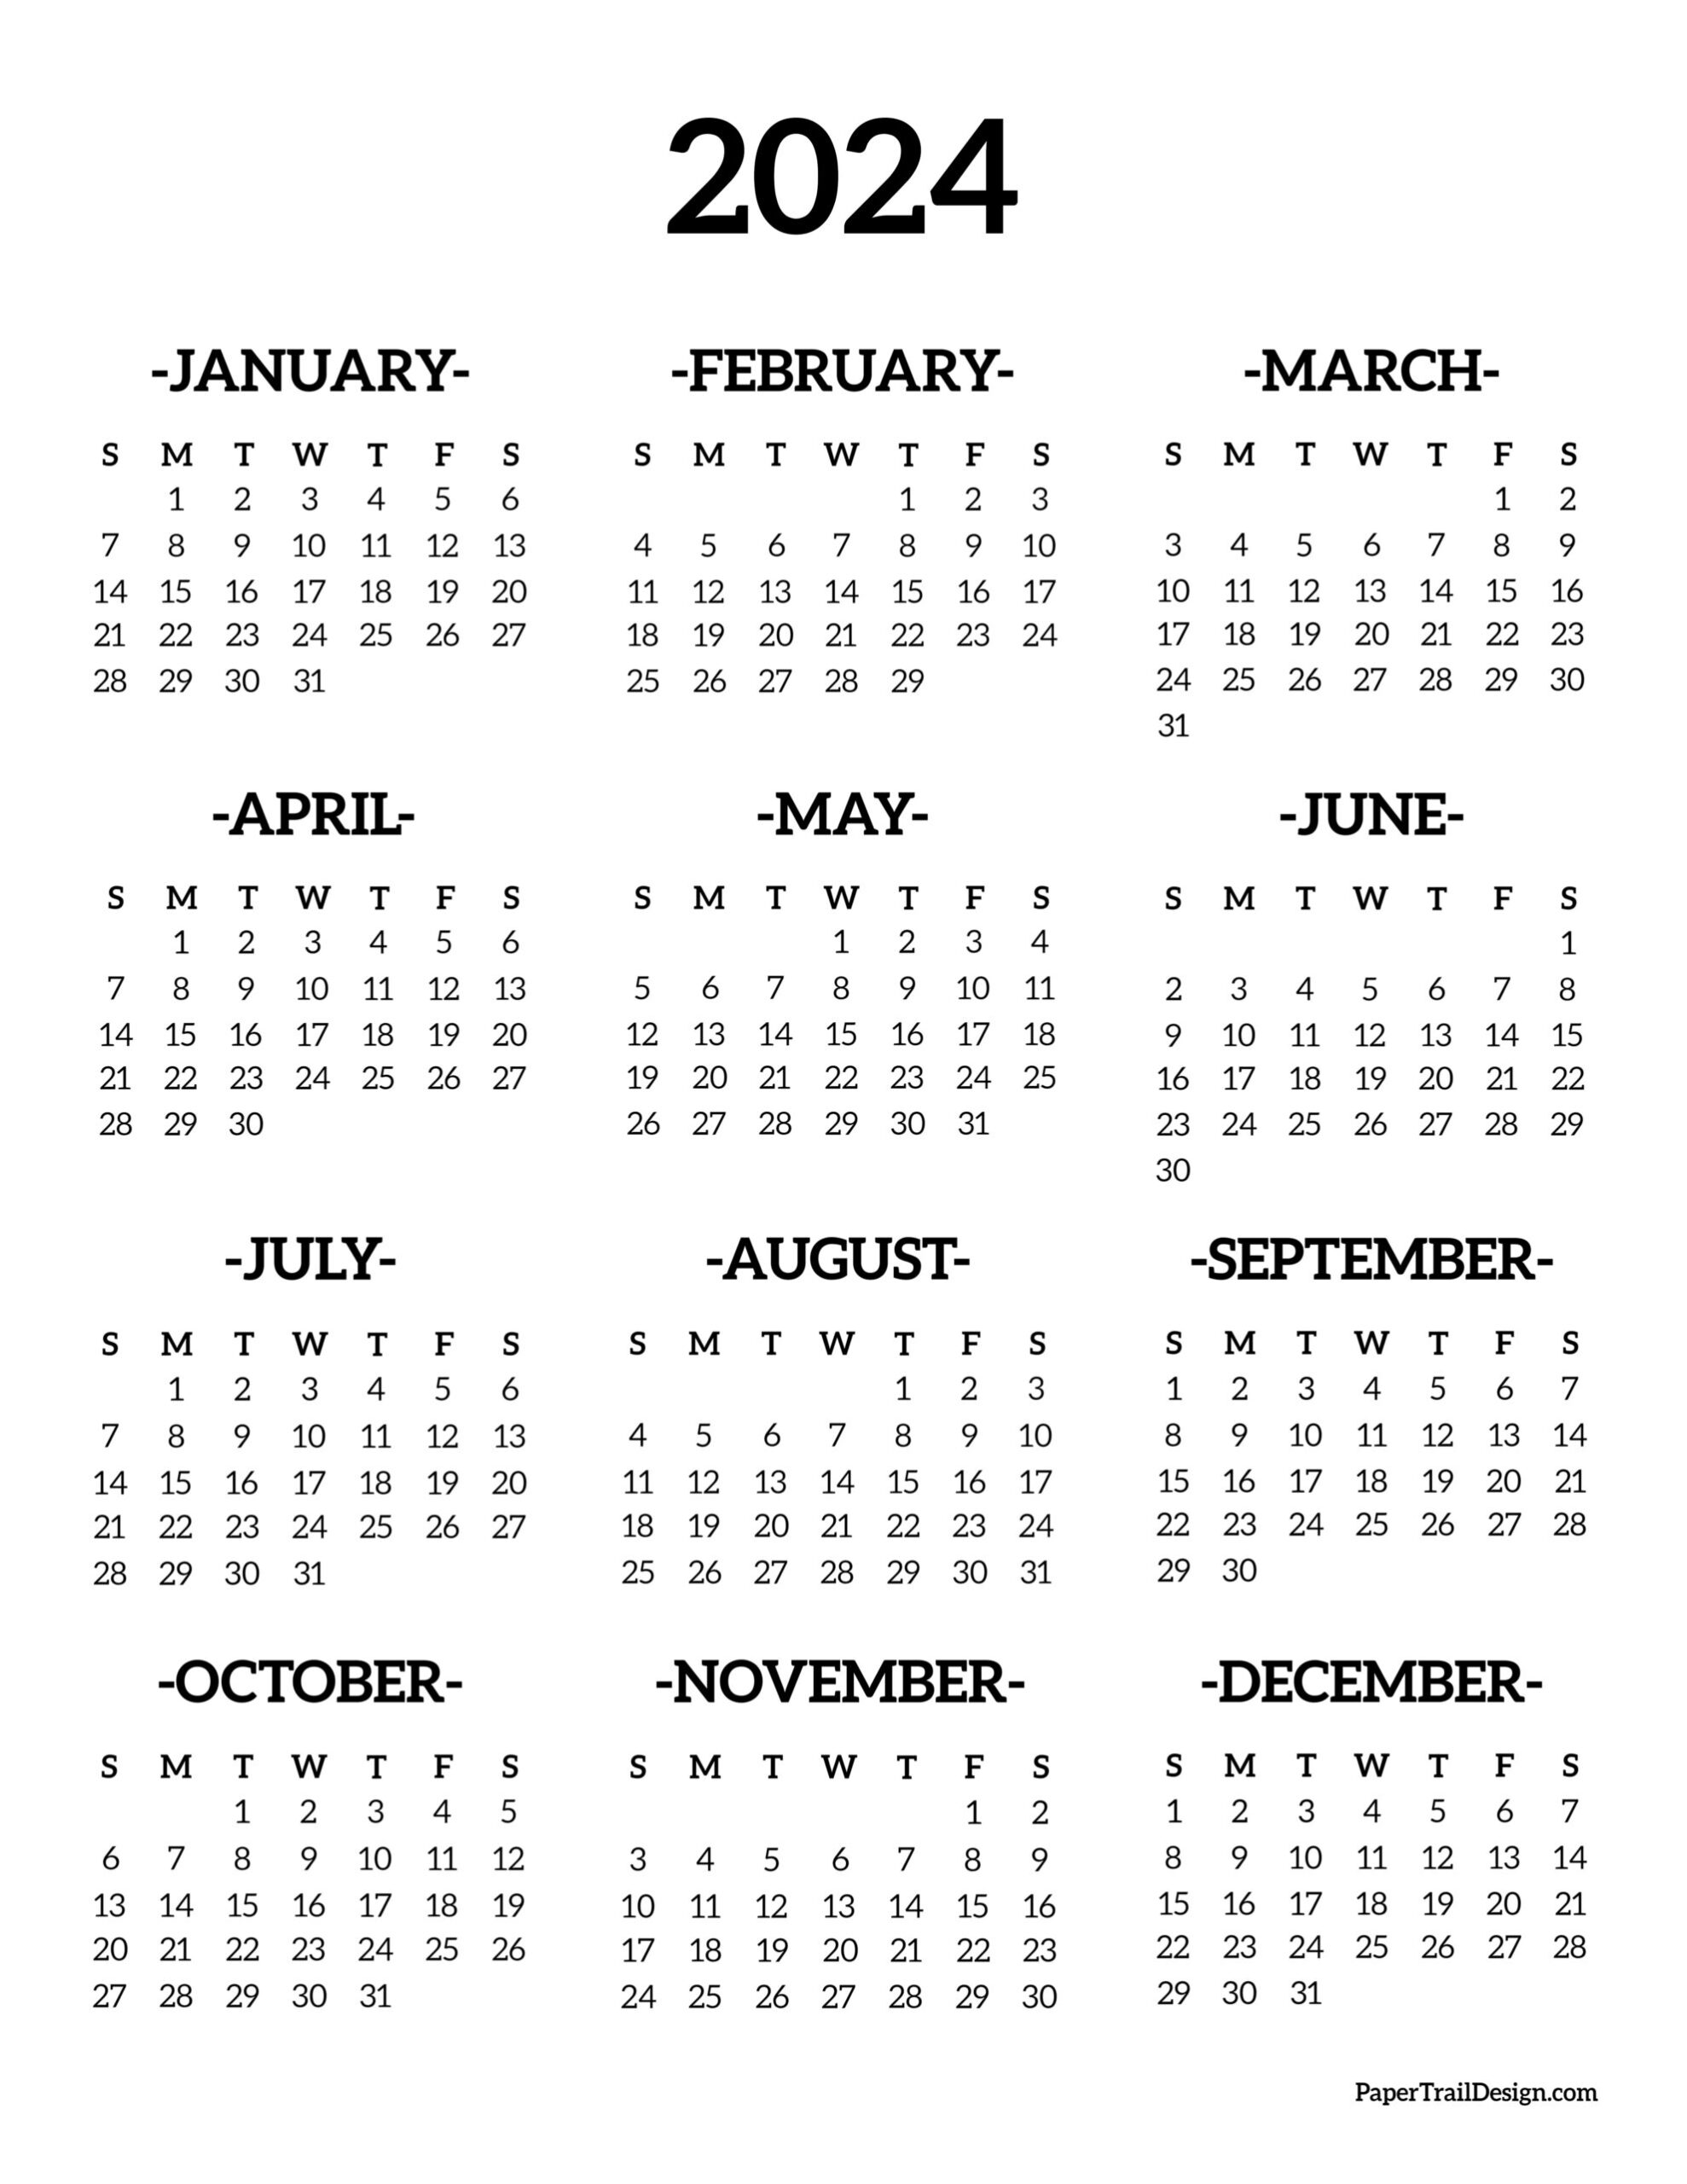 Calendar 2024 Printable One Page - Paper Trail Design for Free 2024 Yearly Printable Calendar